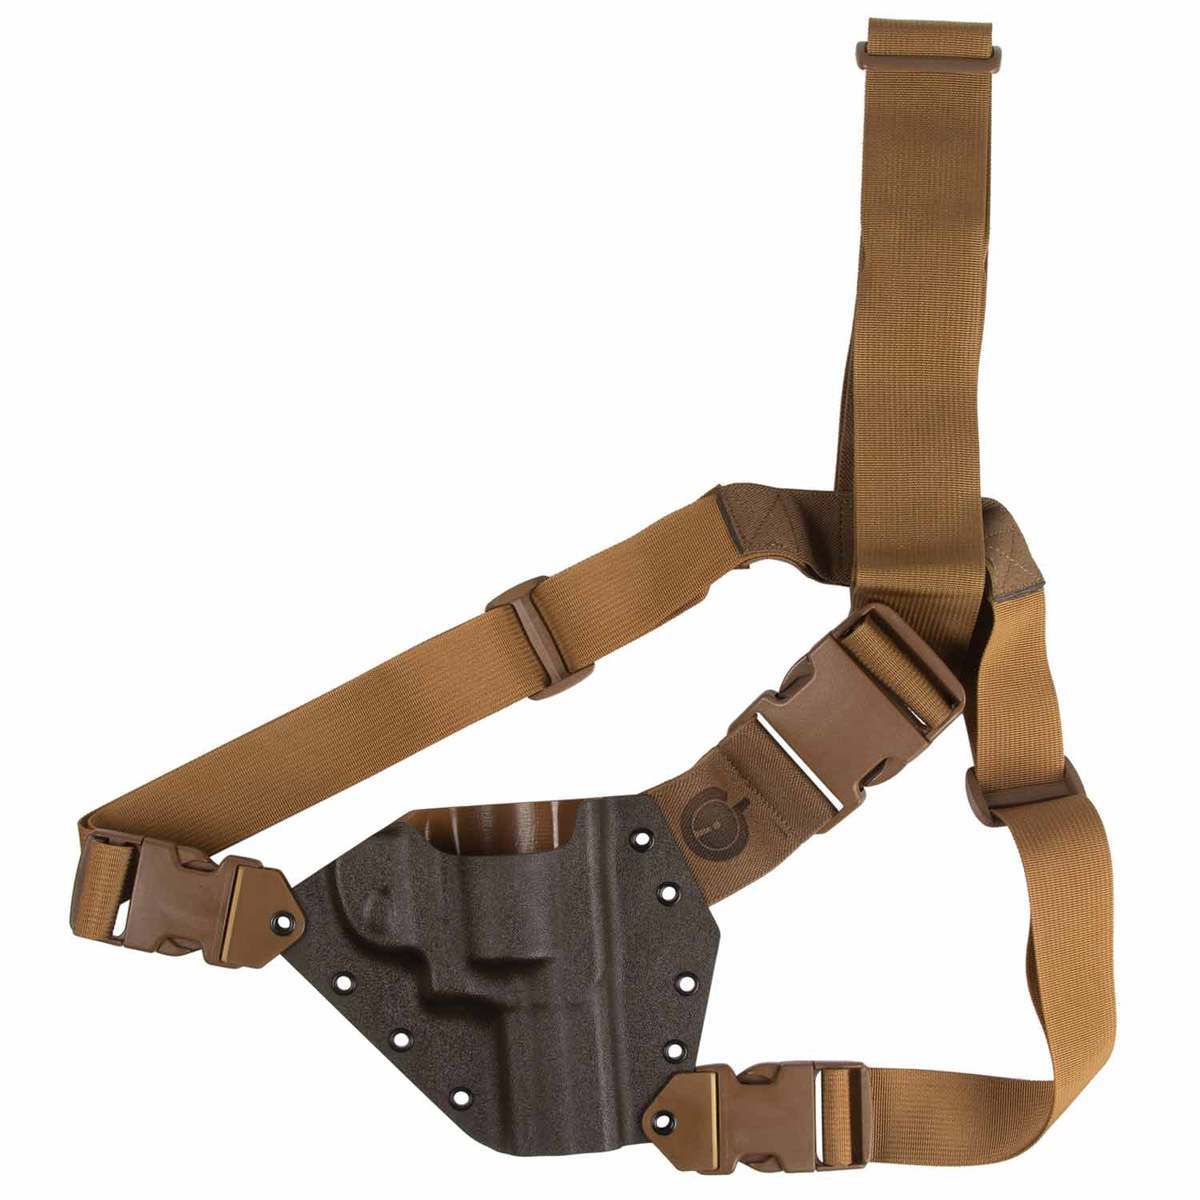 The Denali Chest Holster - MADE IN THE USA - The ULTIMATE gun holster